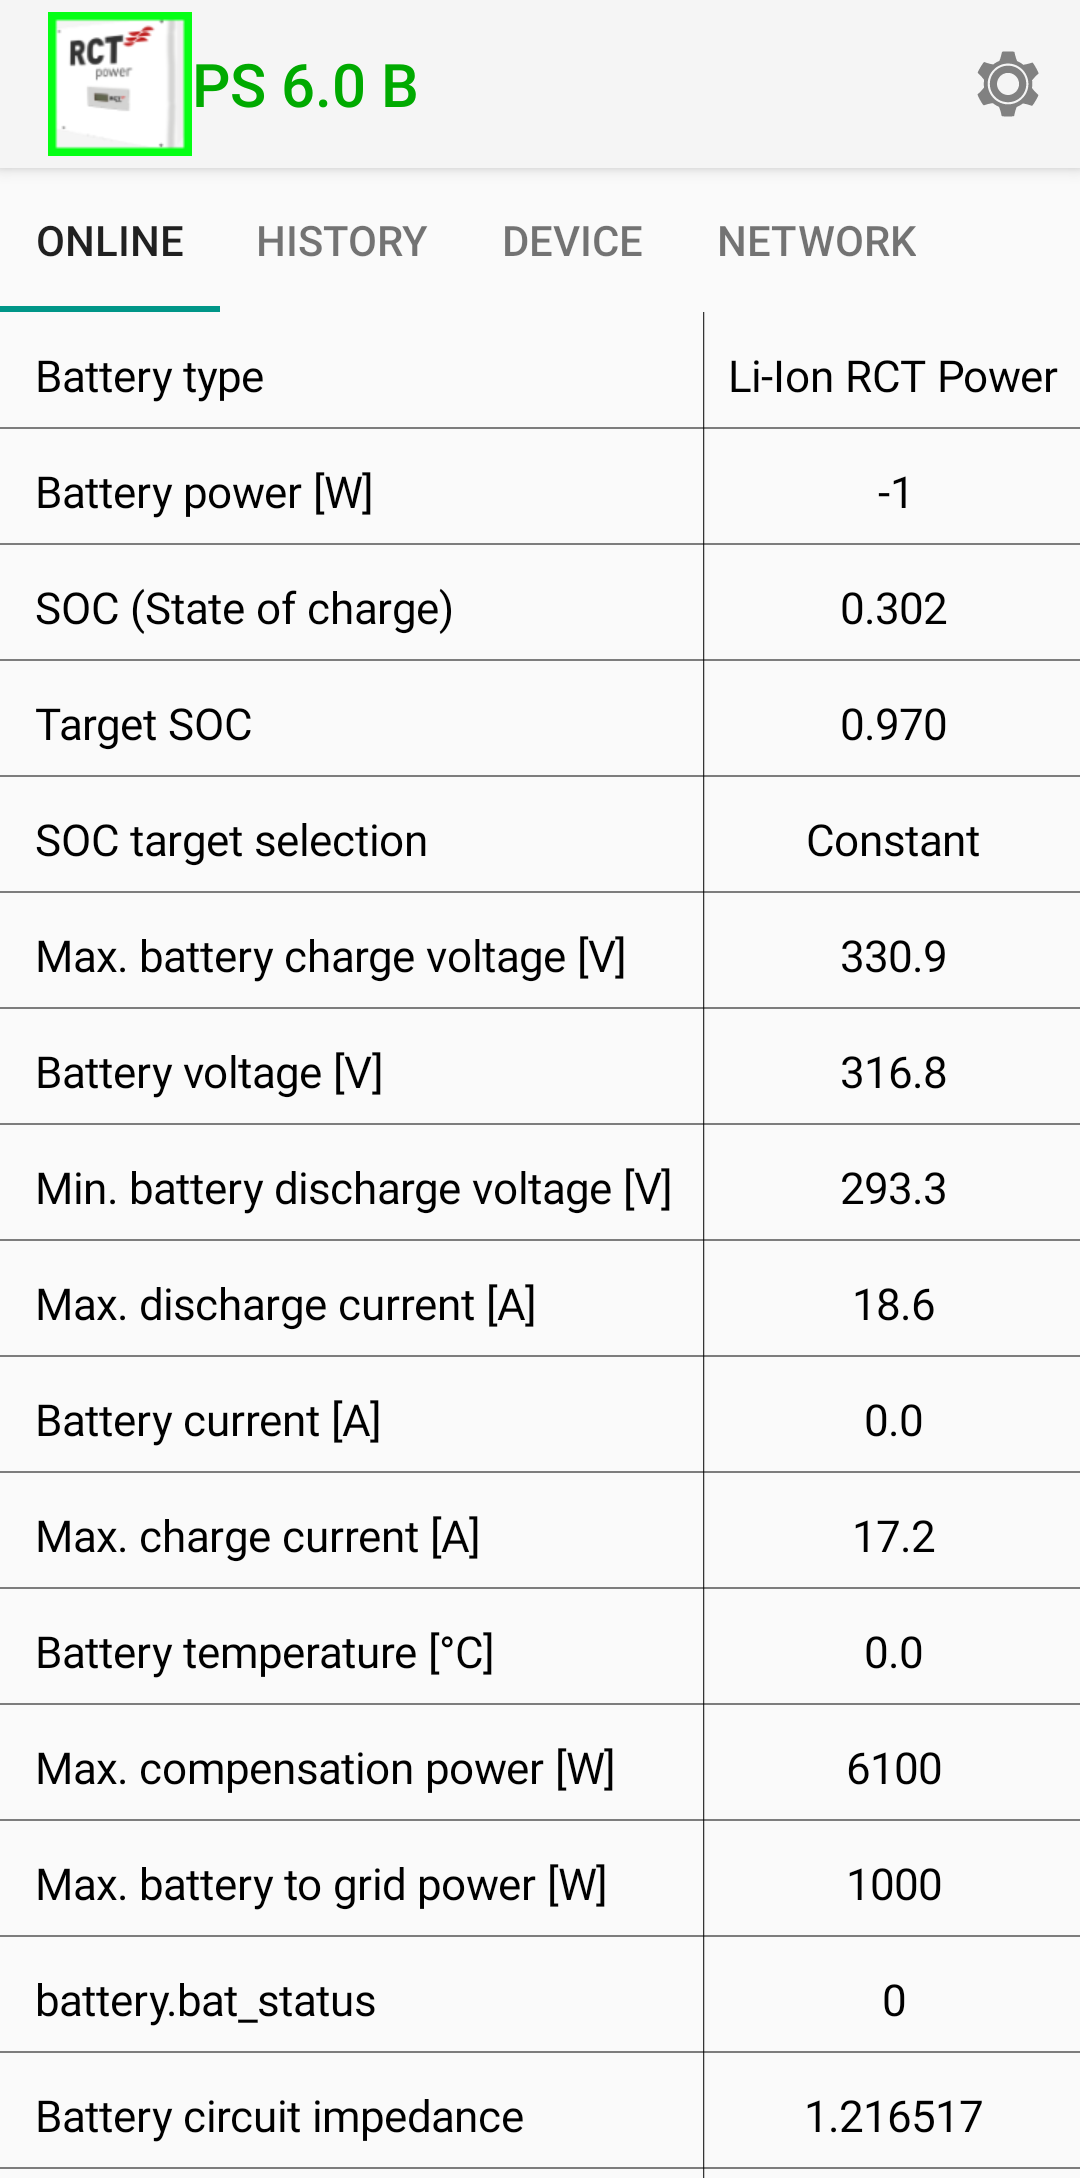 RCT Power App (Android) view of the battery. The tabular view shows a set of values that are explained in the table following this image.